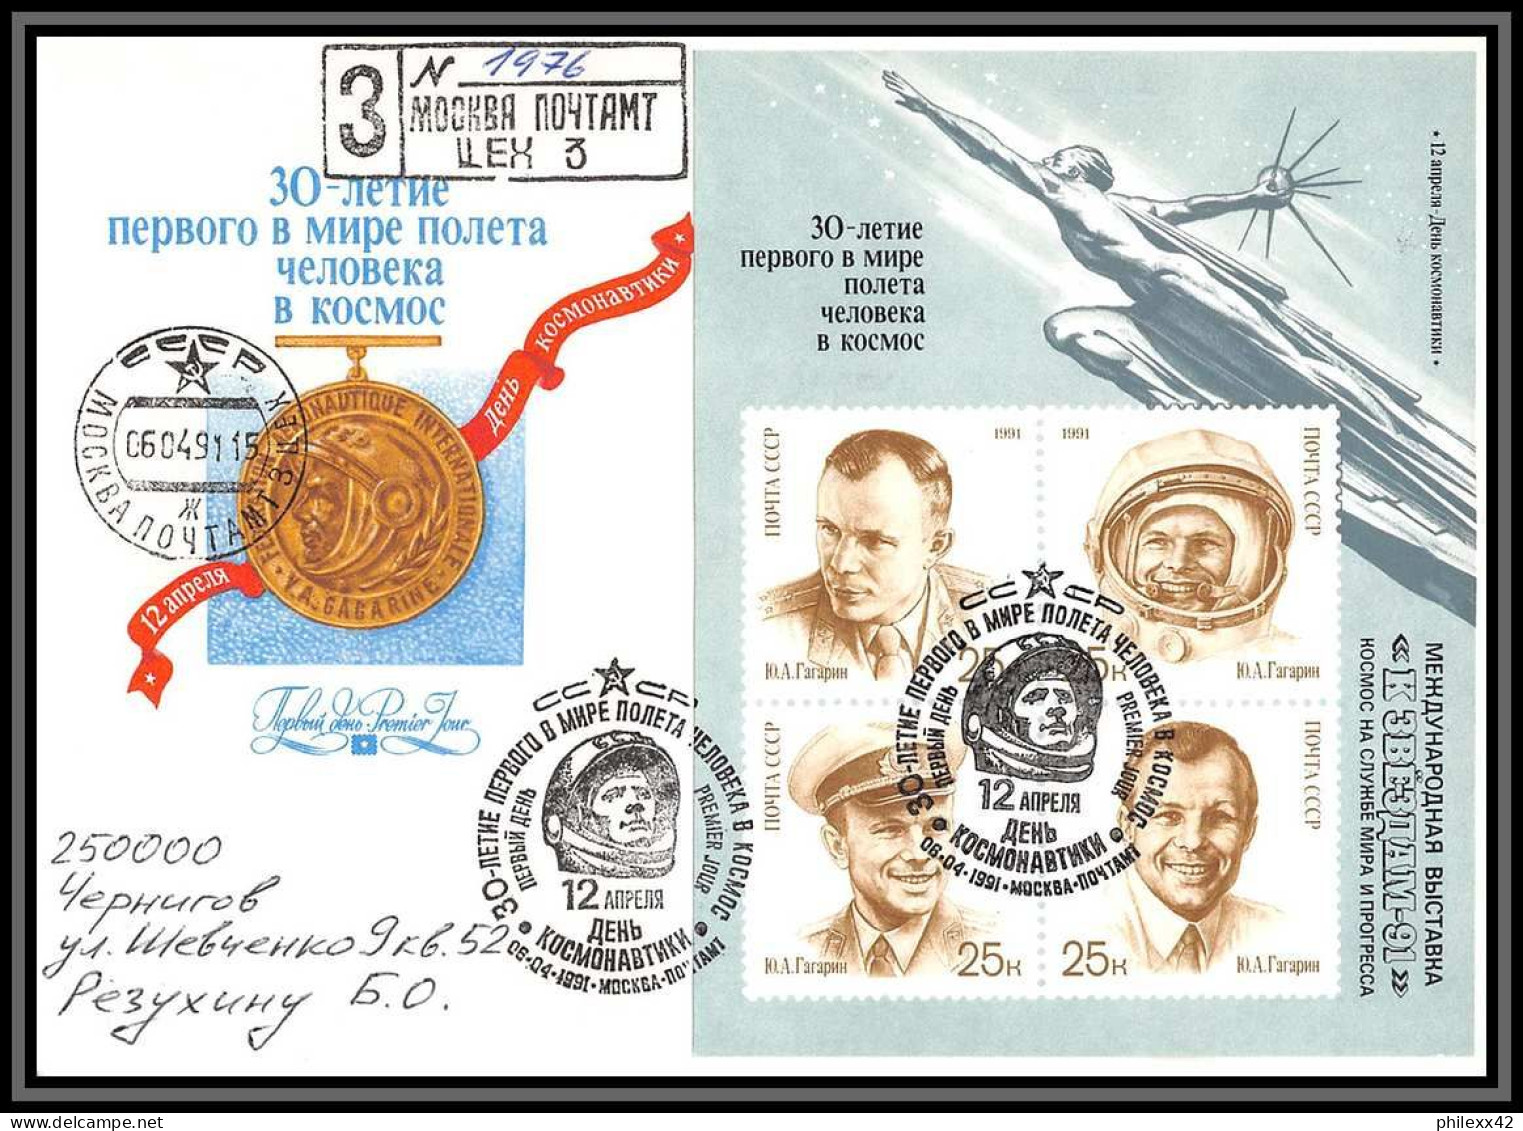 3502a Espace Space Lettre Cover Russie Russia Urss USSR Fdc Gagarine Gagarin Bloc 218 Recommandé Registered - Rusland En USSR